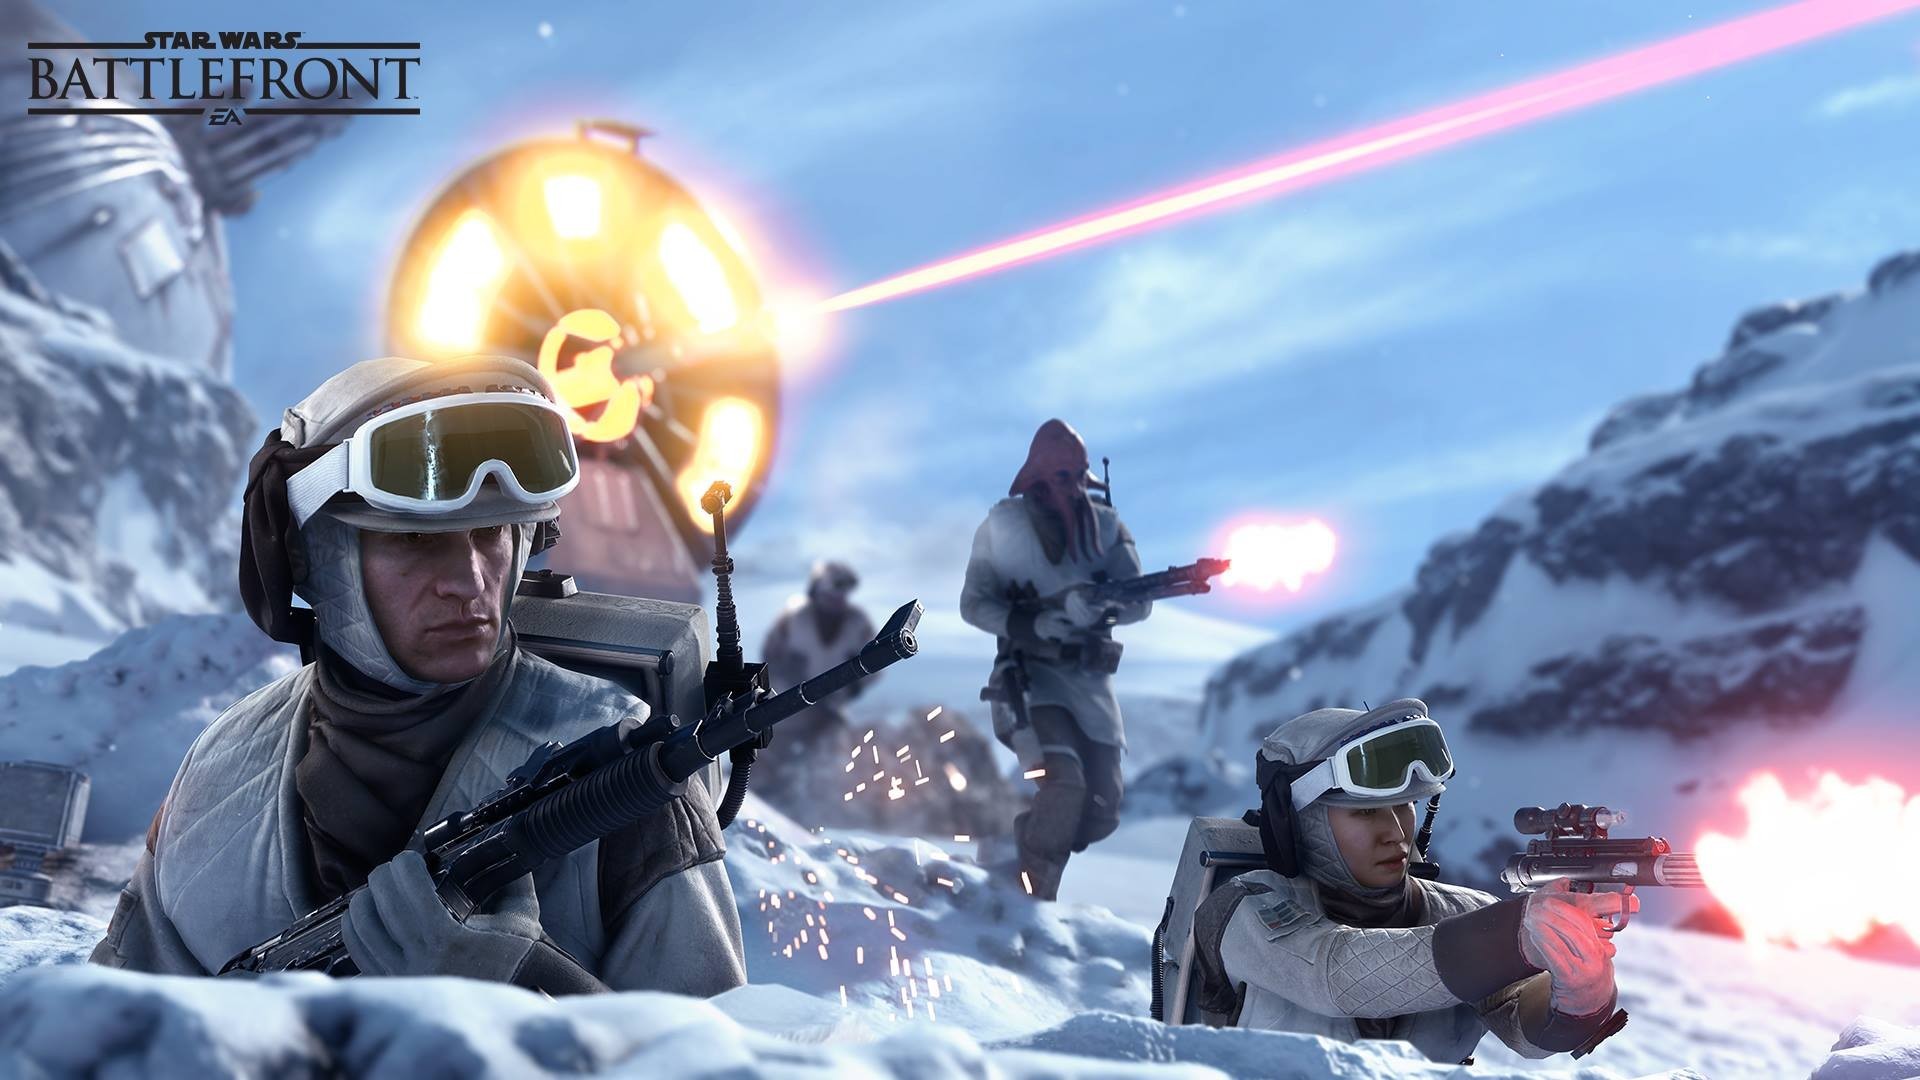 1920x1080 Star Wars: Battlefront, Star Wars, Rebel Alliance, Hoth, Battle Of Hoth,  A280 Blaster Rifle, DH 17 Blaster Pistol Wallpapers HD / Desktop and Mobile  ...